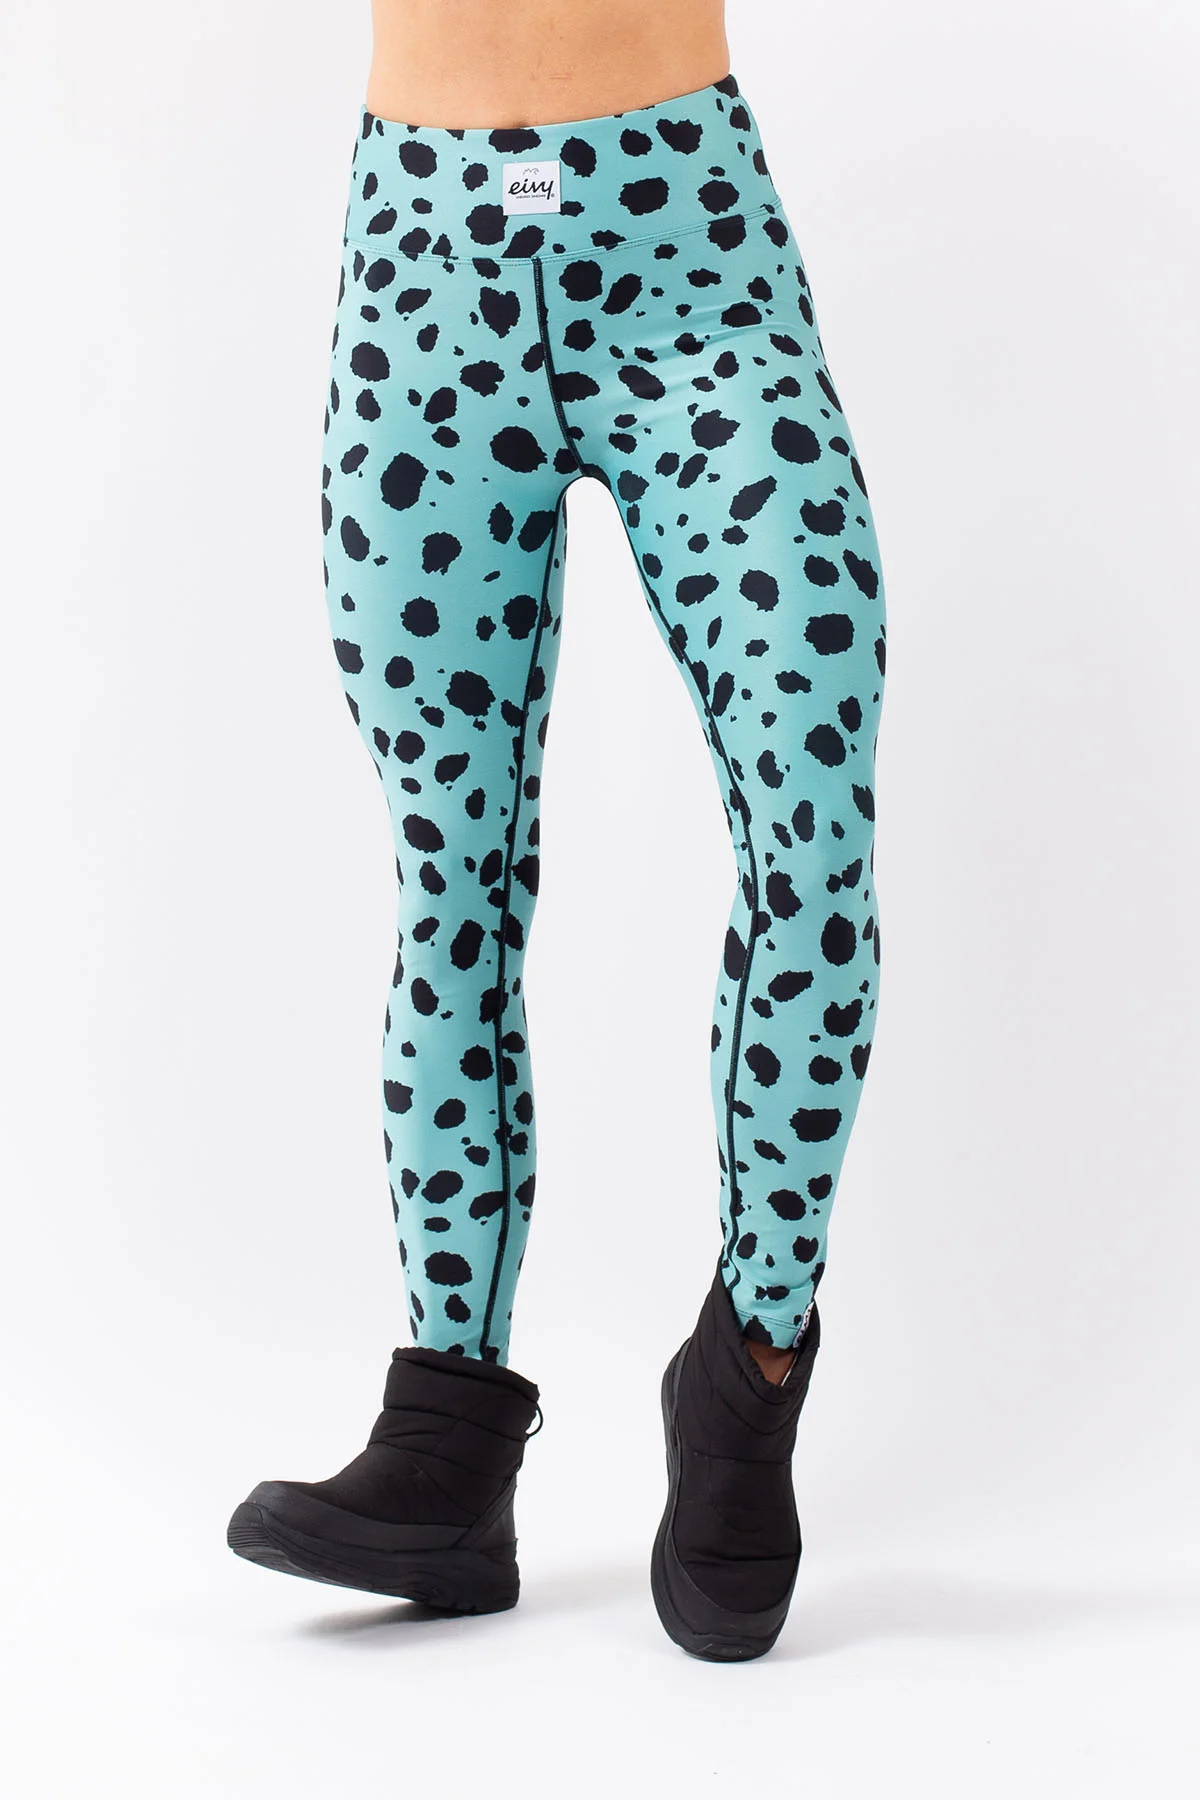 Icecold Tights - Turquoise Cheetah | L